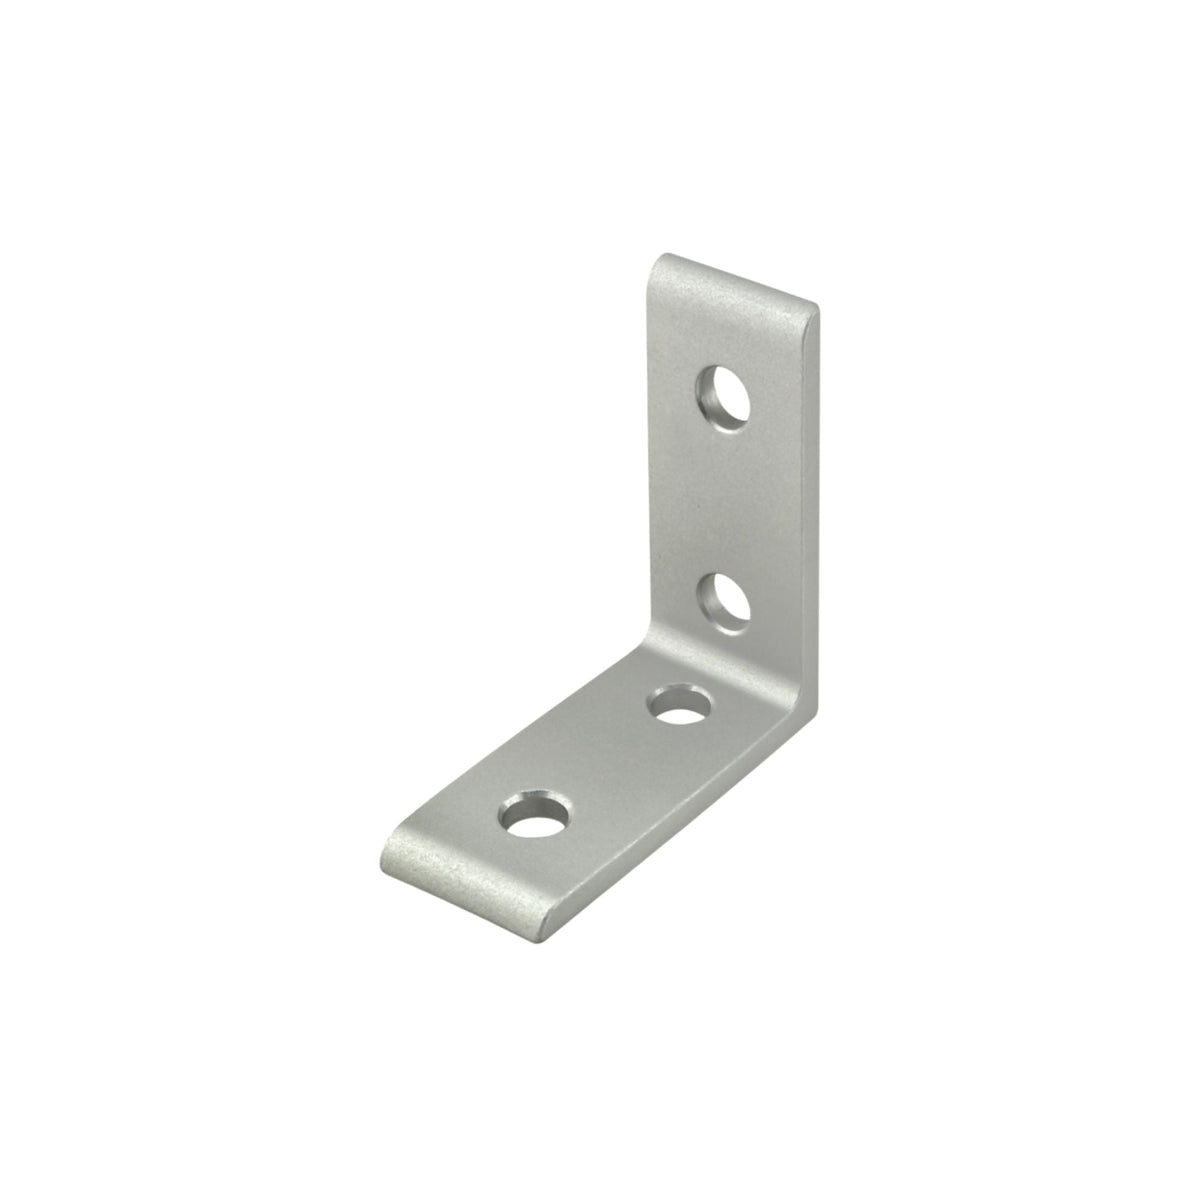 tall inside corner bracket with two holes on the bottom side and two holes on the right side